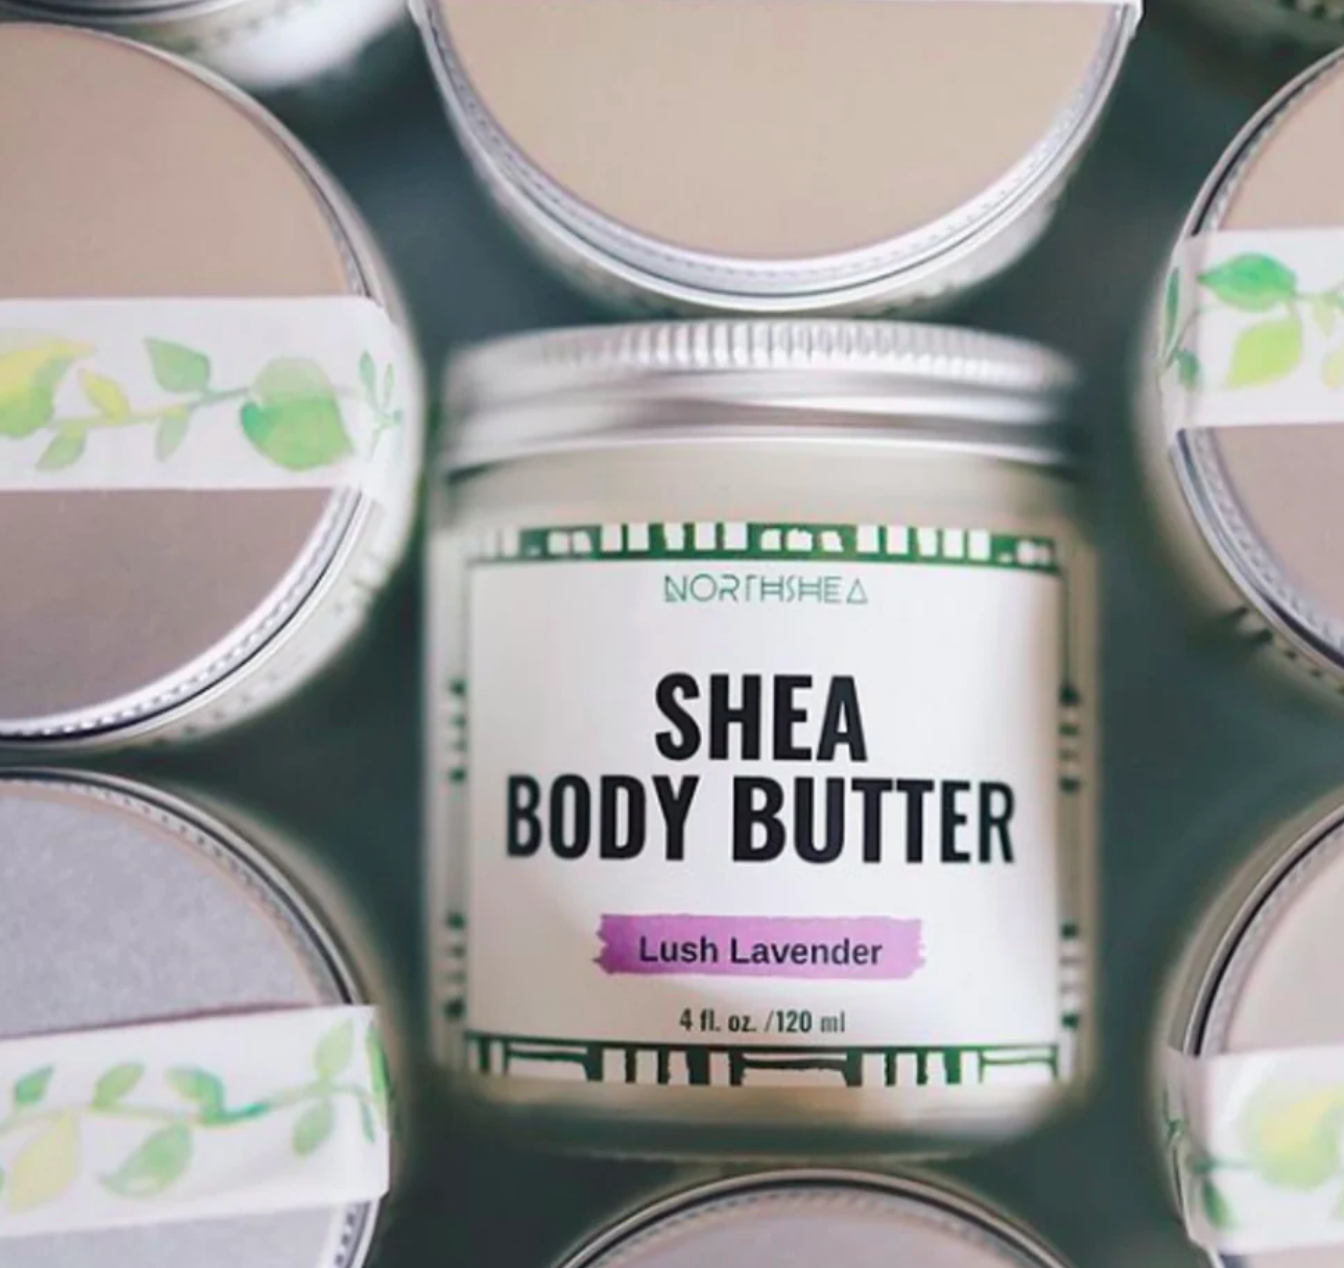 jars of Lush Lavender Shea Body Butter by Northshea